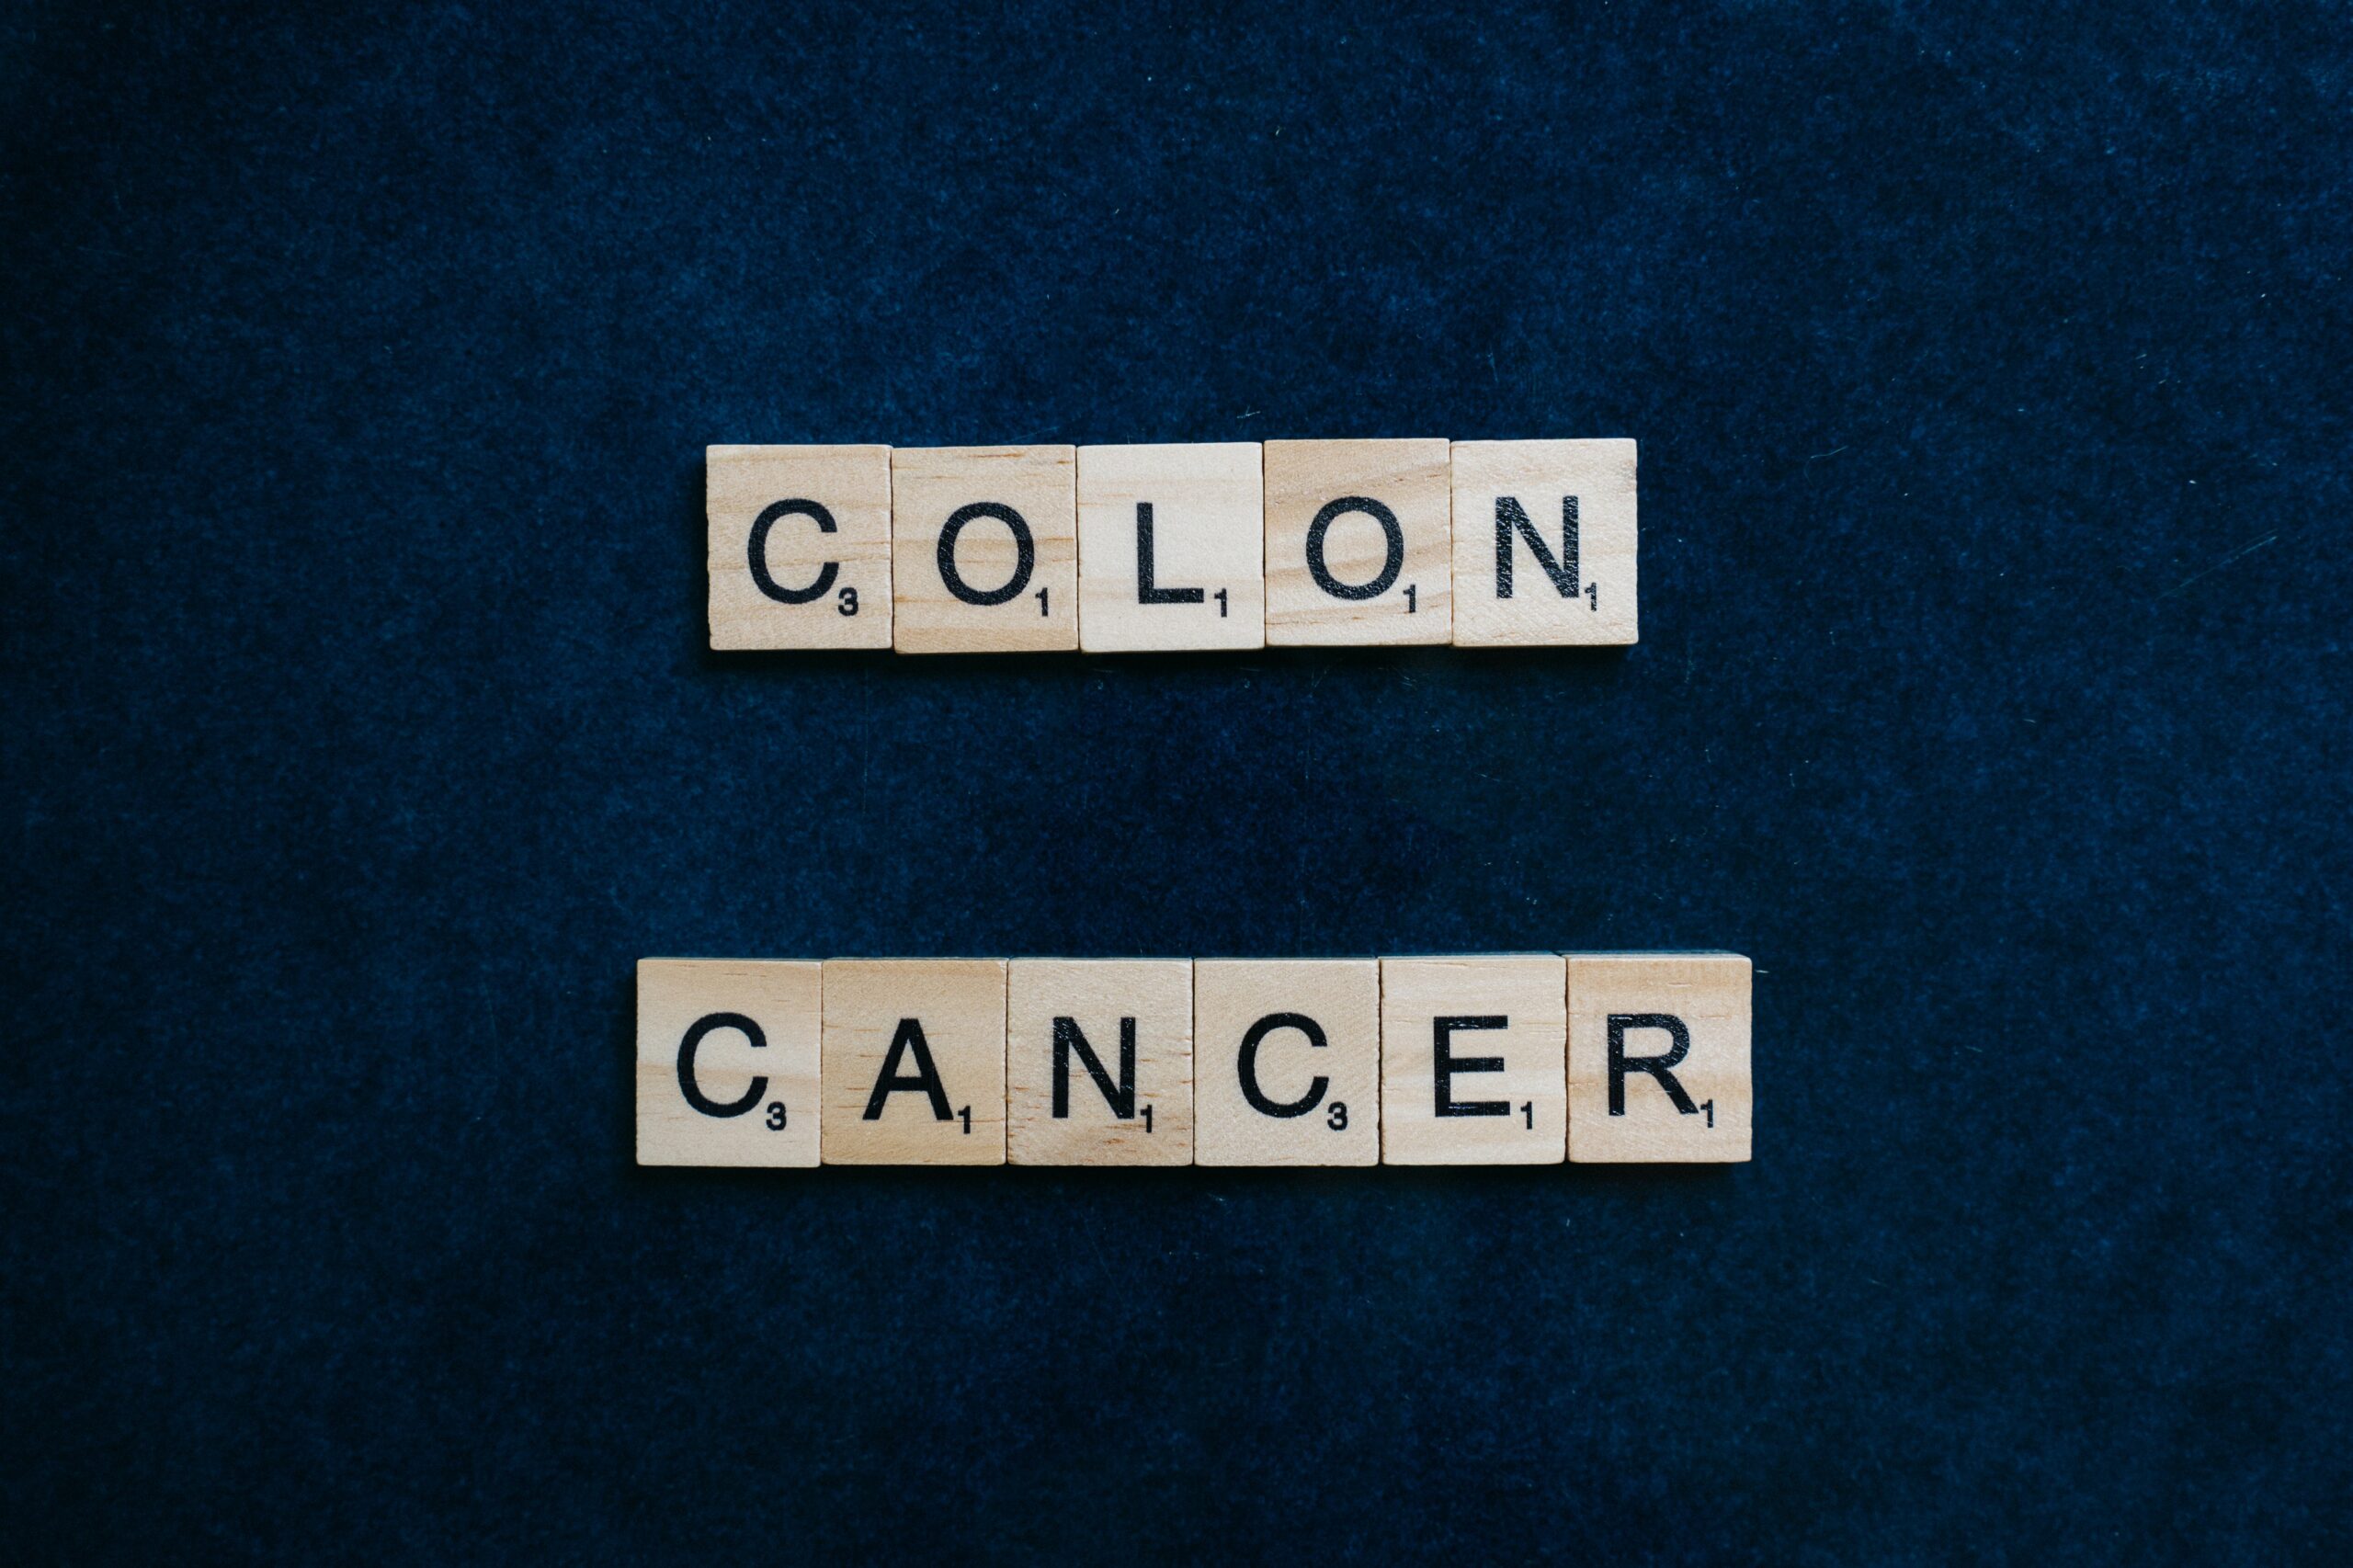 Colon Cancer: Understanding the Risks, Symptoms, and Screening Recommendations